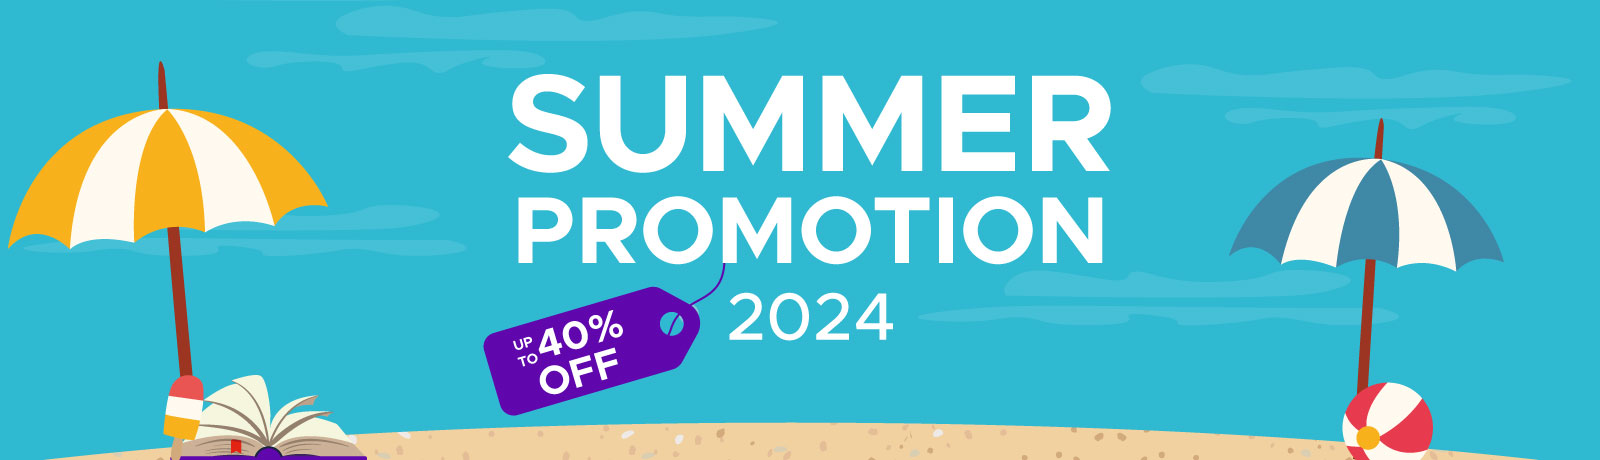 Summer Promotions 2024